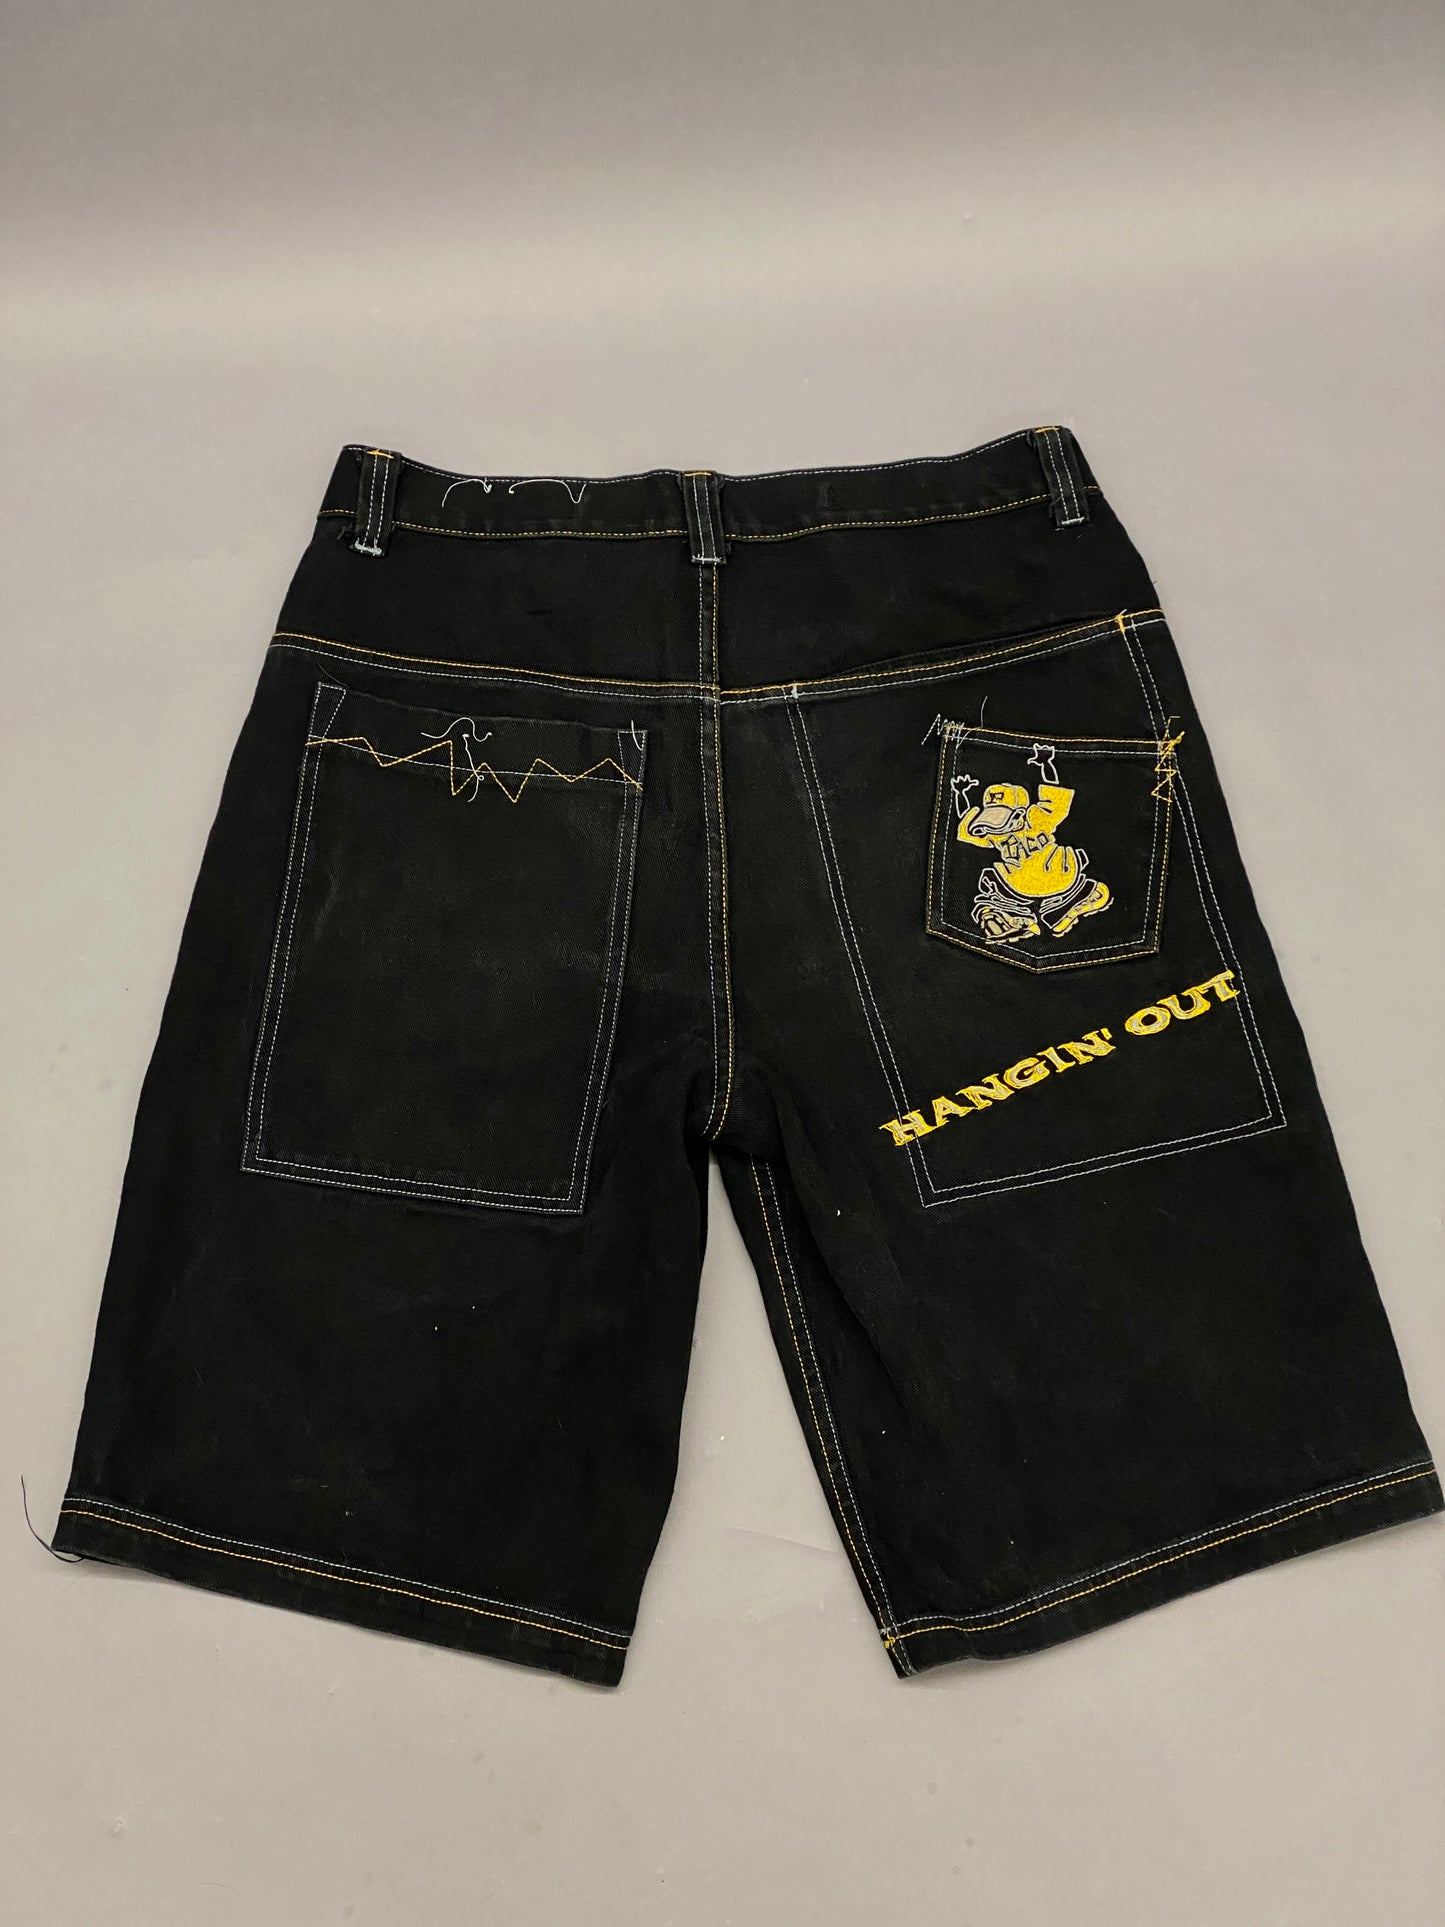 Paco Jeans Vintage Wide Shorts "Just Chillin" - 34